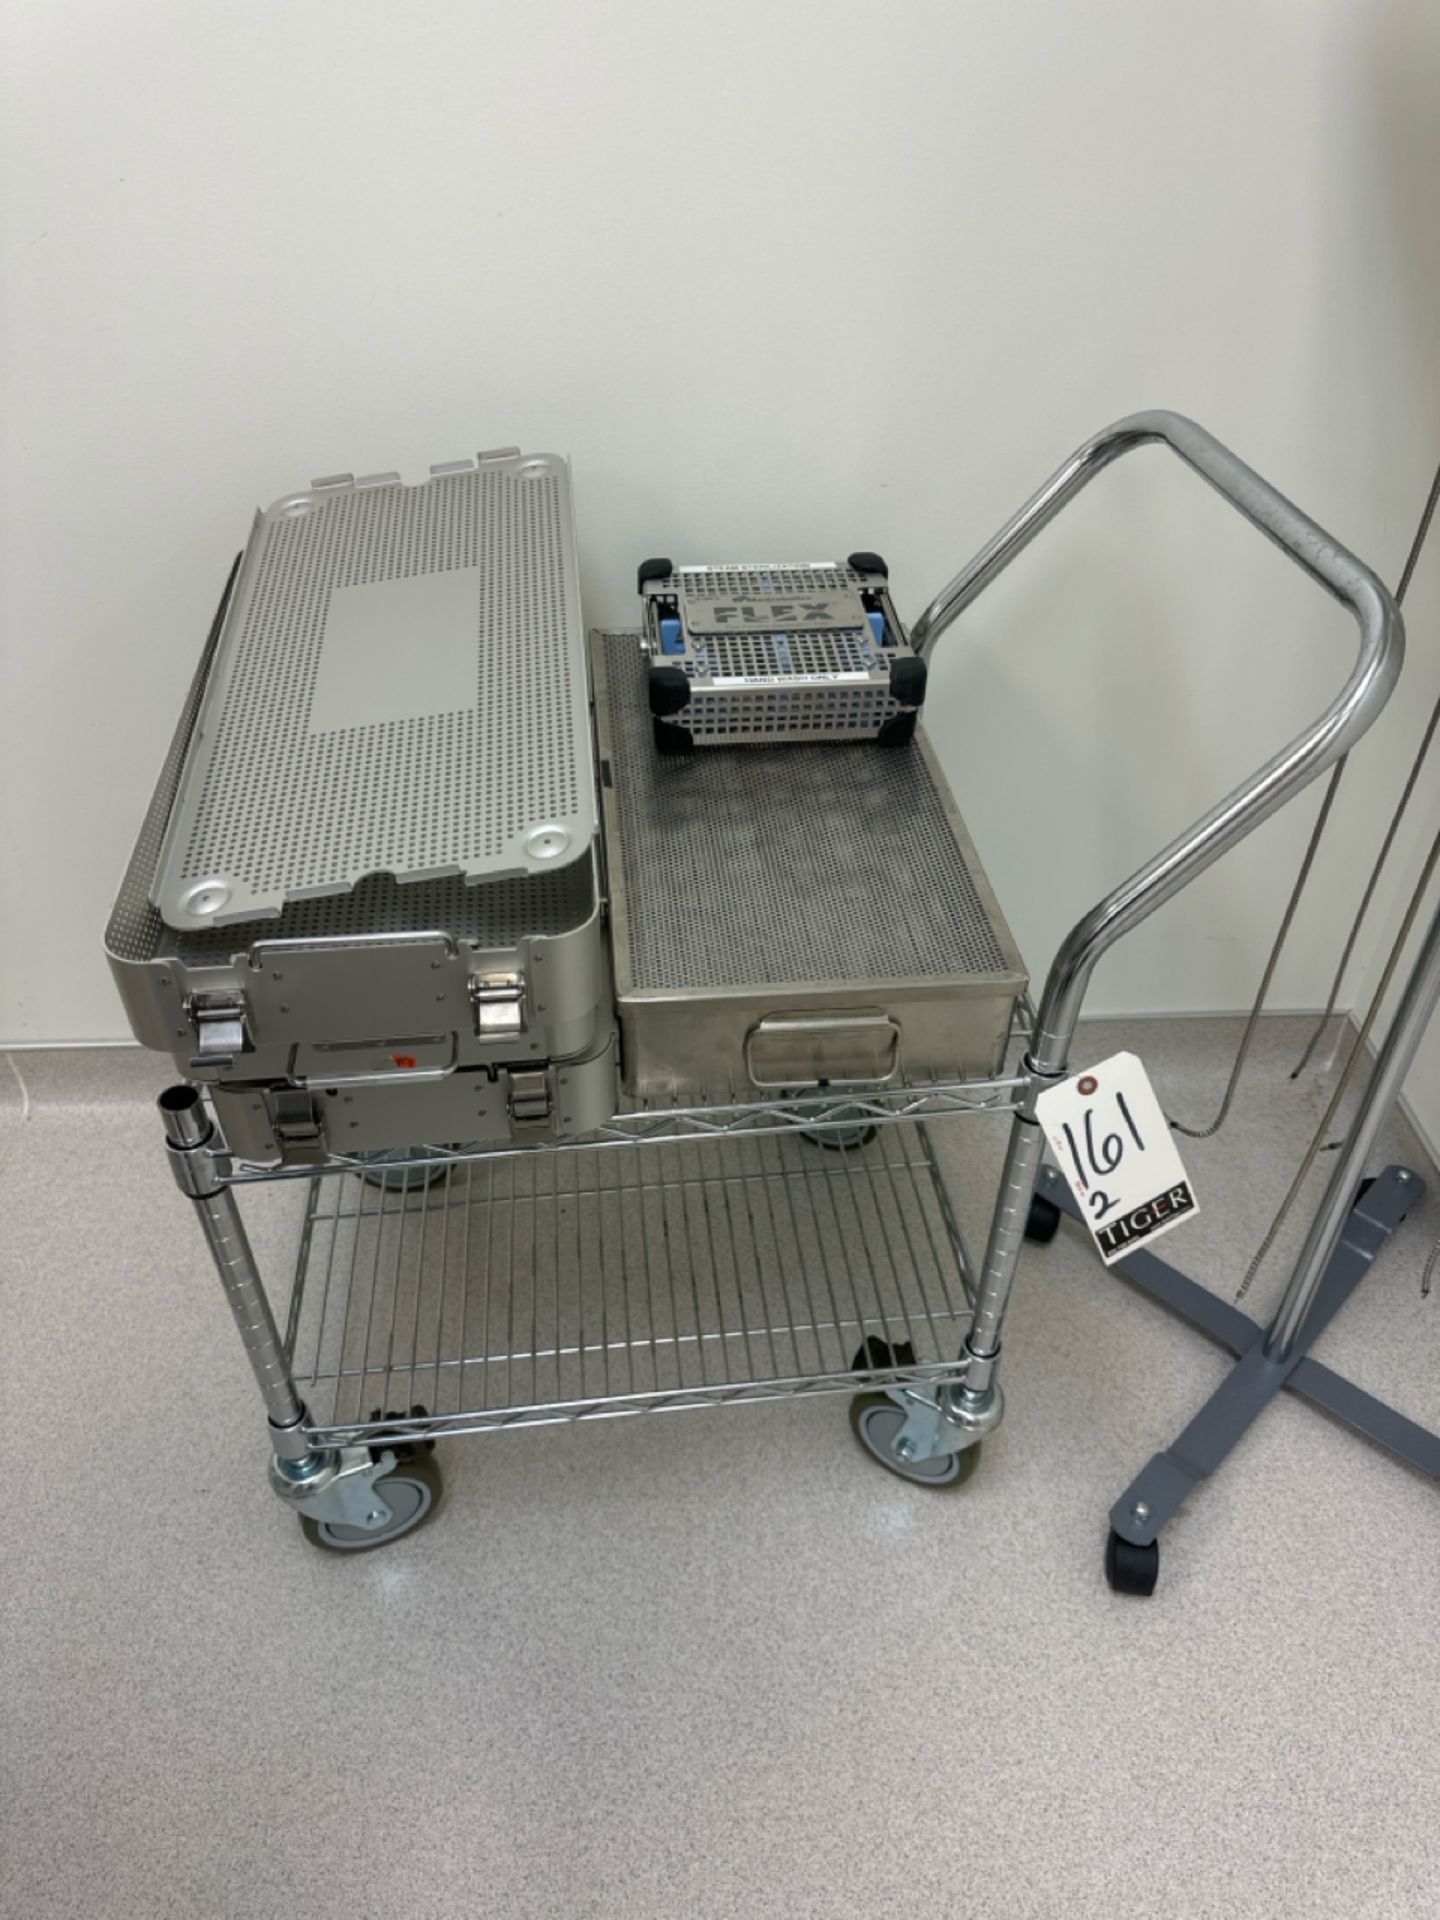 Uline Rolling Cart w/ Contents & Mobile Instrument Holder - Image 2 of 4